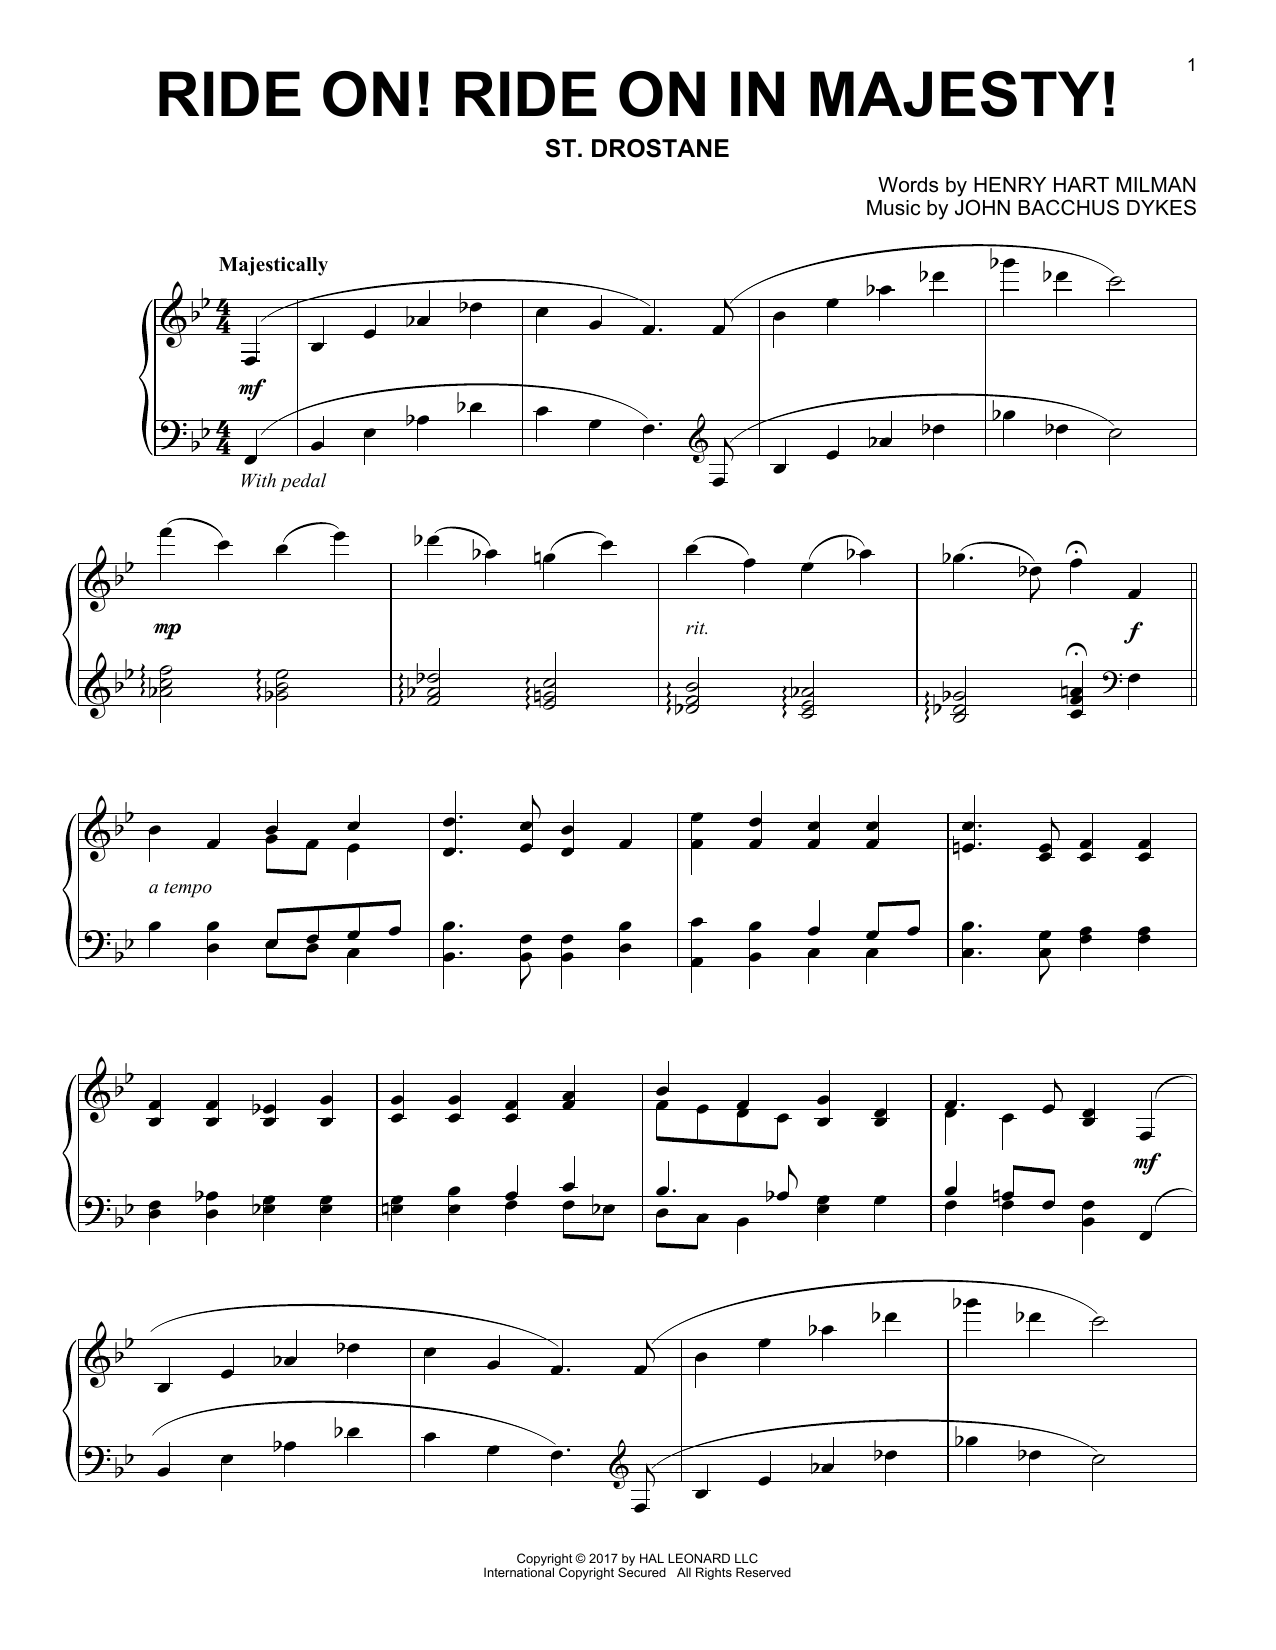 Download John Bacchus Dykes Ride On! Ride On In Majesty! Sheet Music